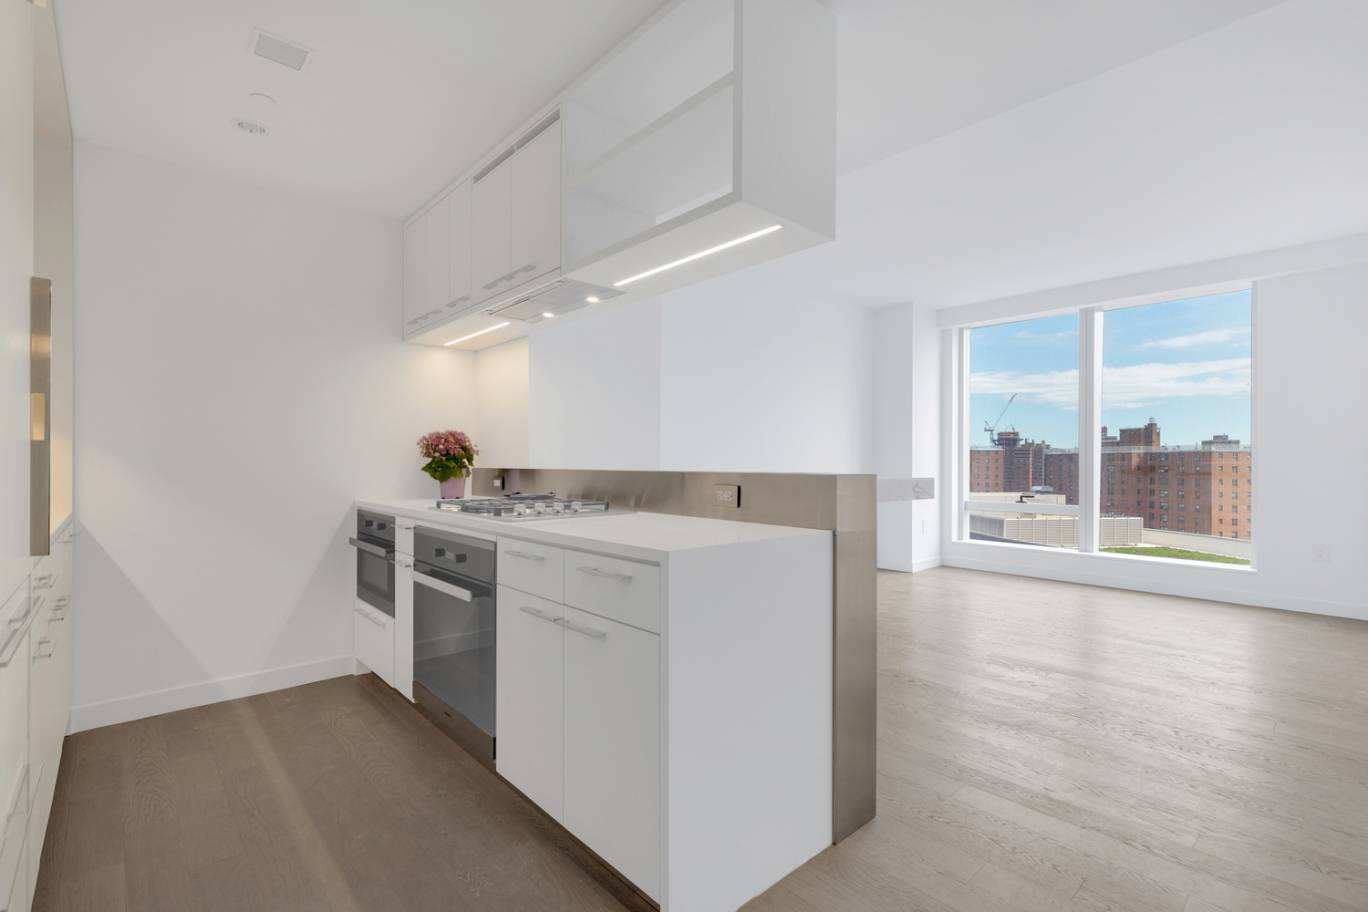 Come home to One Manhattan Square, a new luxury full service, fully amenitized condo building in the heart of Lower East Side.